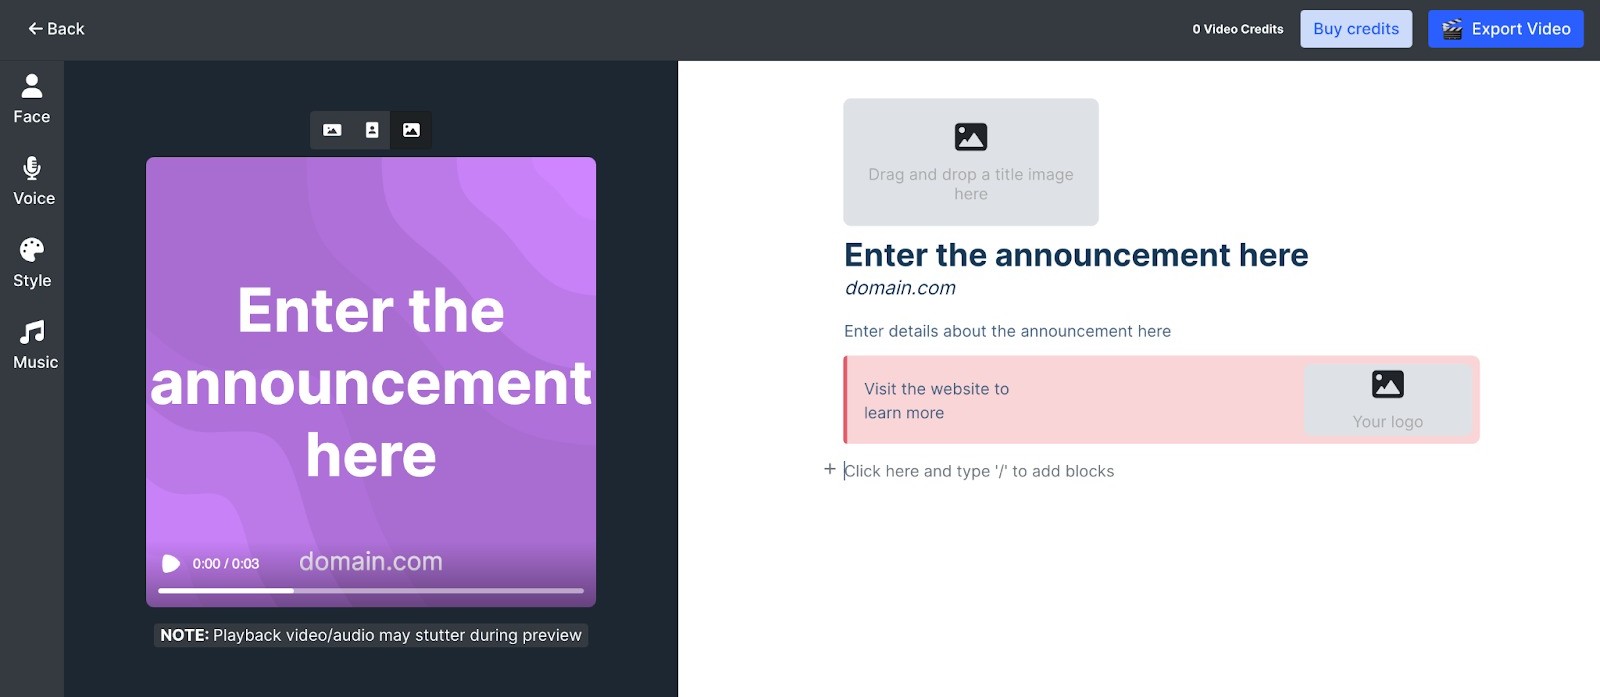 Prompts user to "Enter the announcement here," followed by a space to enter more details.